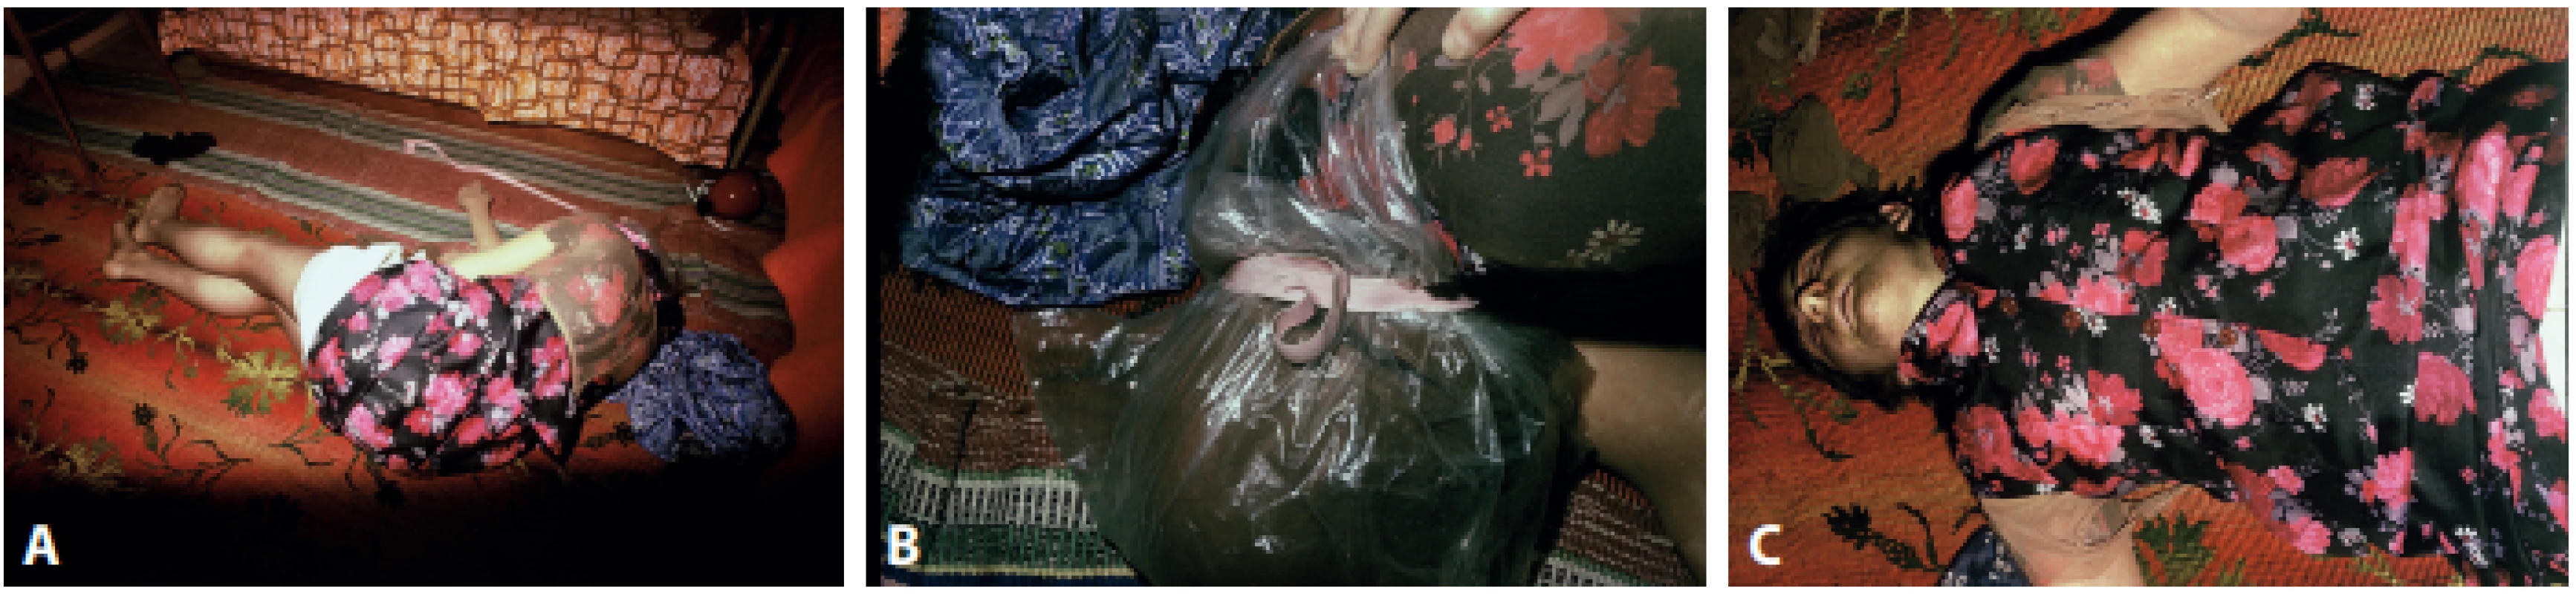 The body scene of 18-year-old young man. A: Position of the deceased at the death scene. B: A plastic bag wrapped around the head of the deceased
with a tape. C: The young man dressed in women´s clothing. 